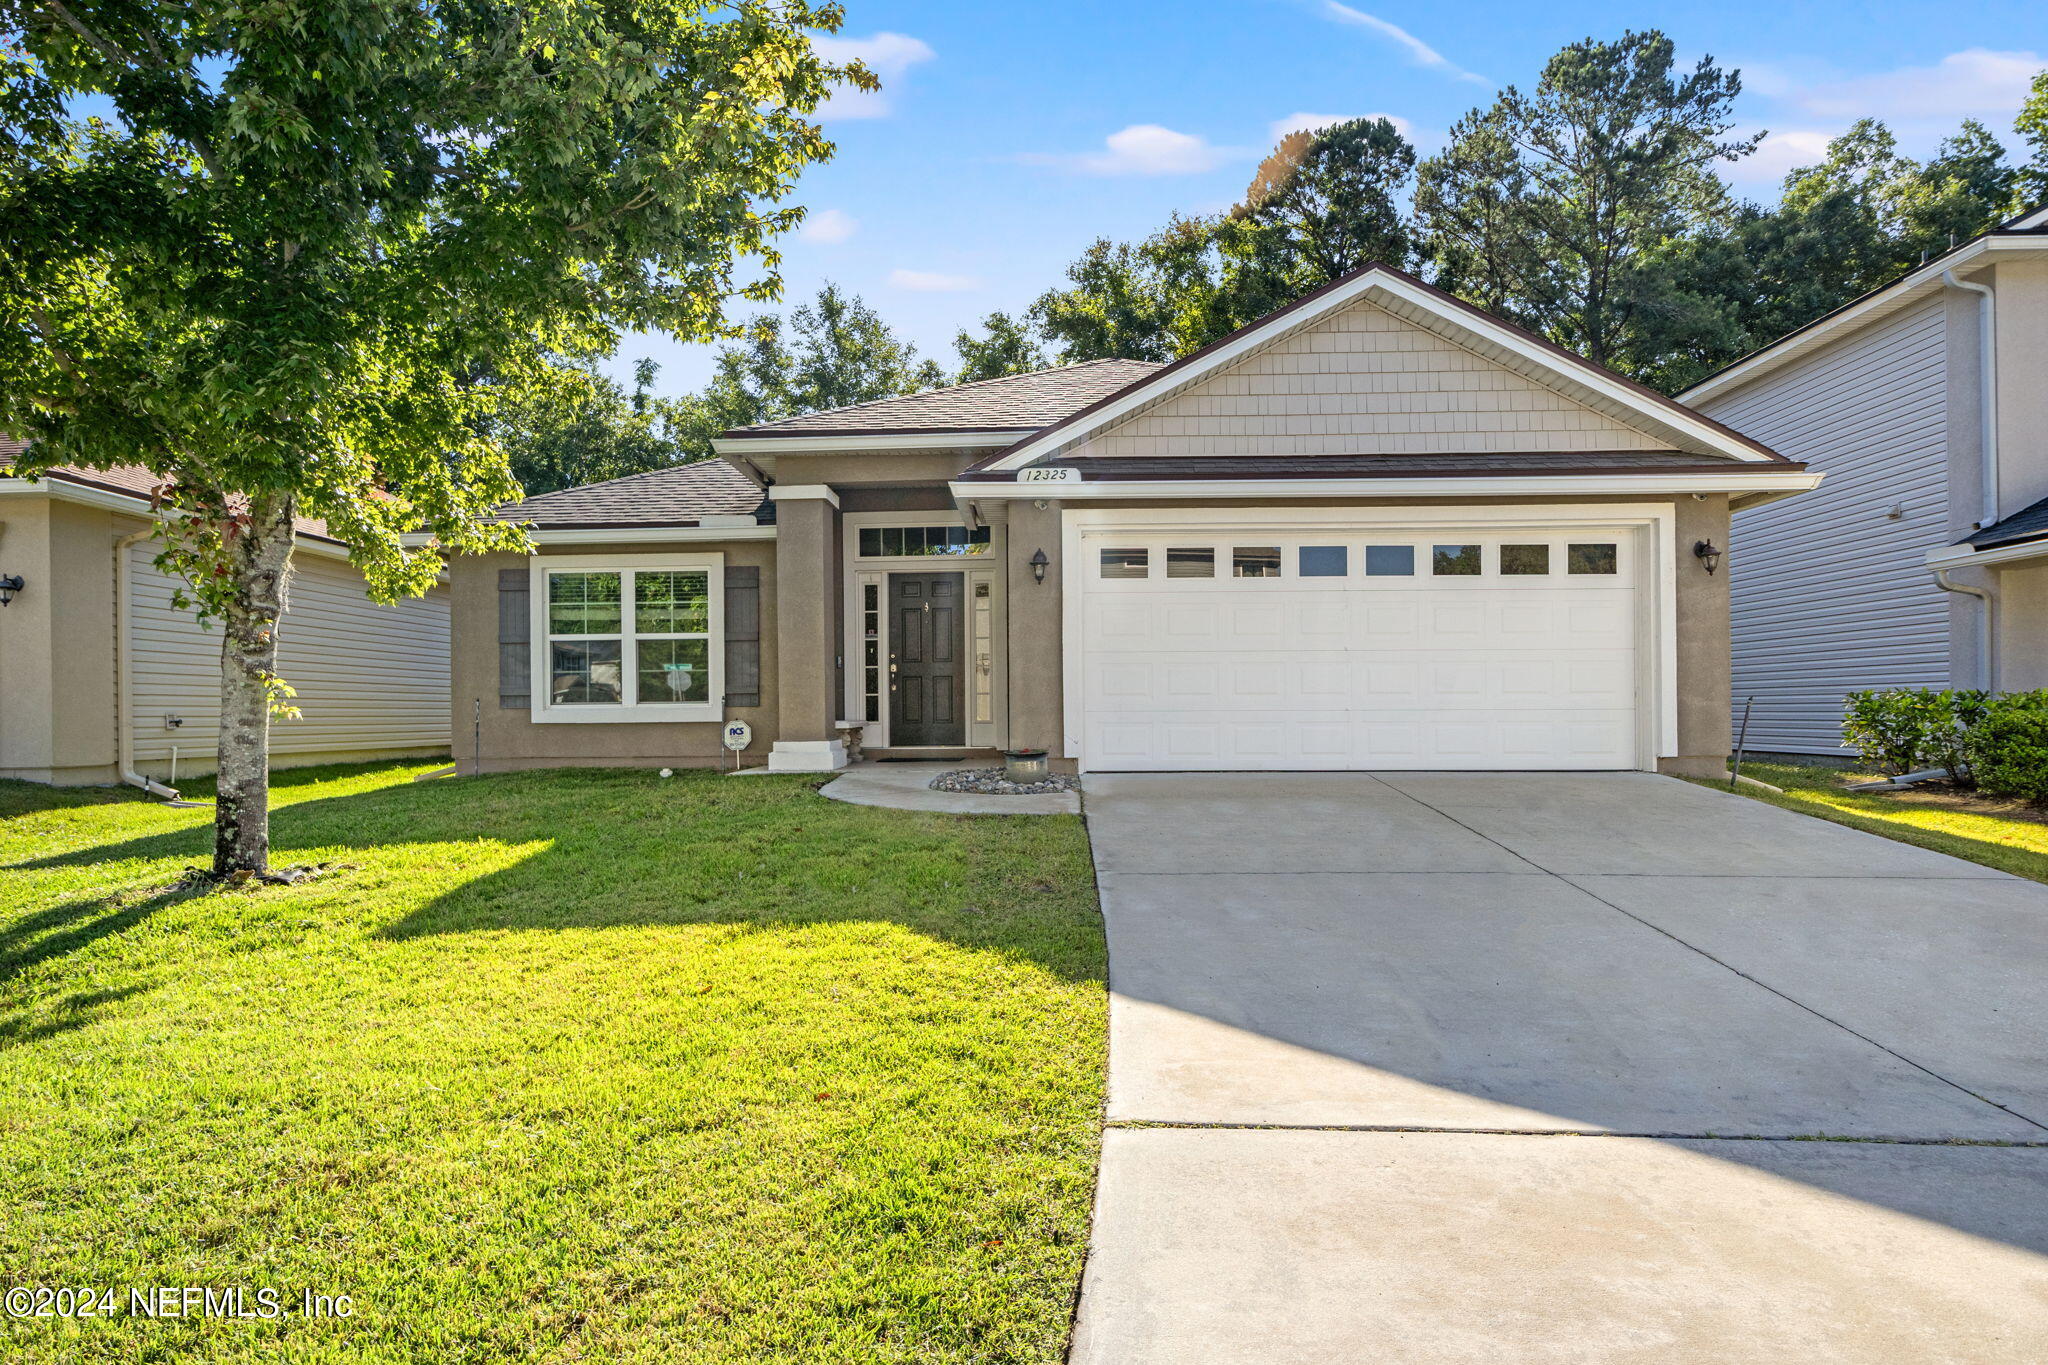 Jacksonville, FL home for sale located at 12325 Rouen Cove Drive, Jacksonville, FL 32226